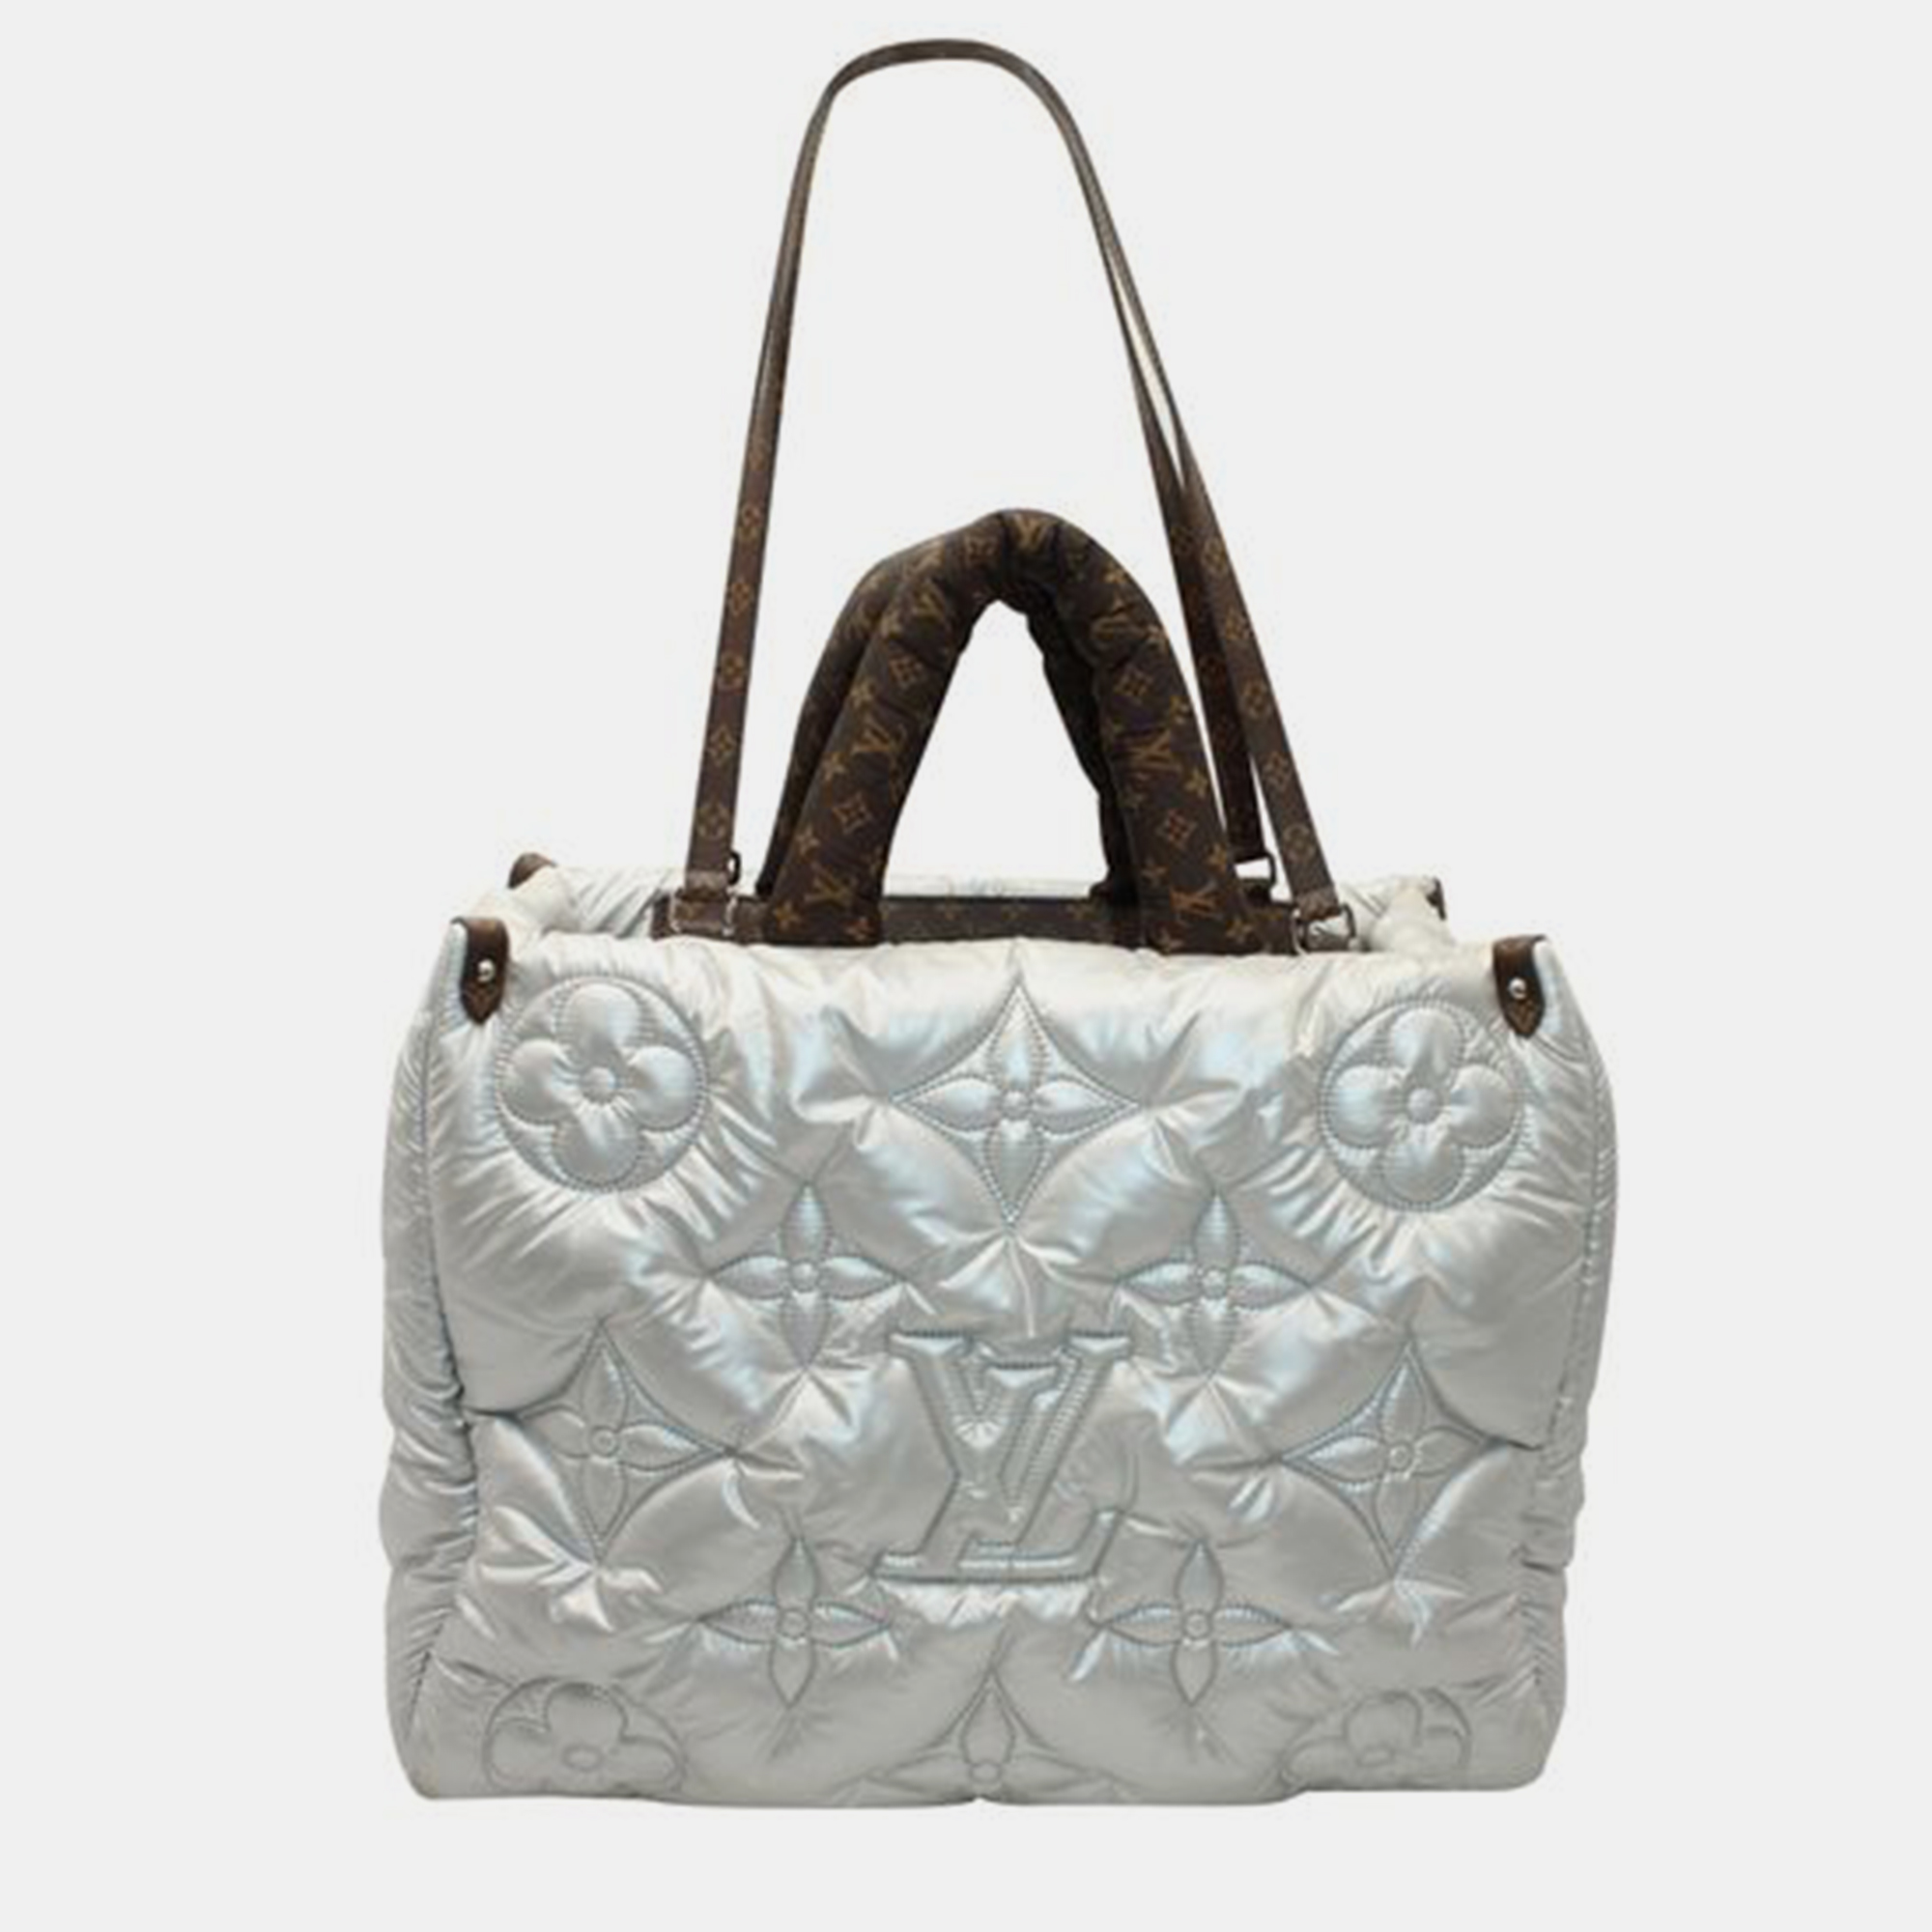 LOUIS VUITTON Silver Pillow OnTheGo GM Tote Bag SHOULDER BAGS